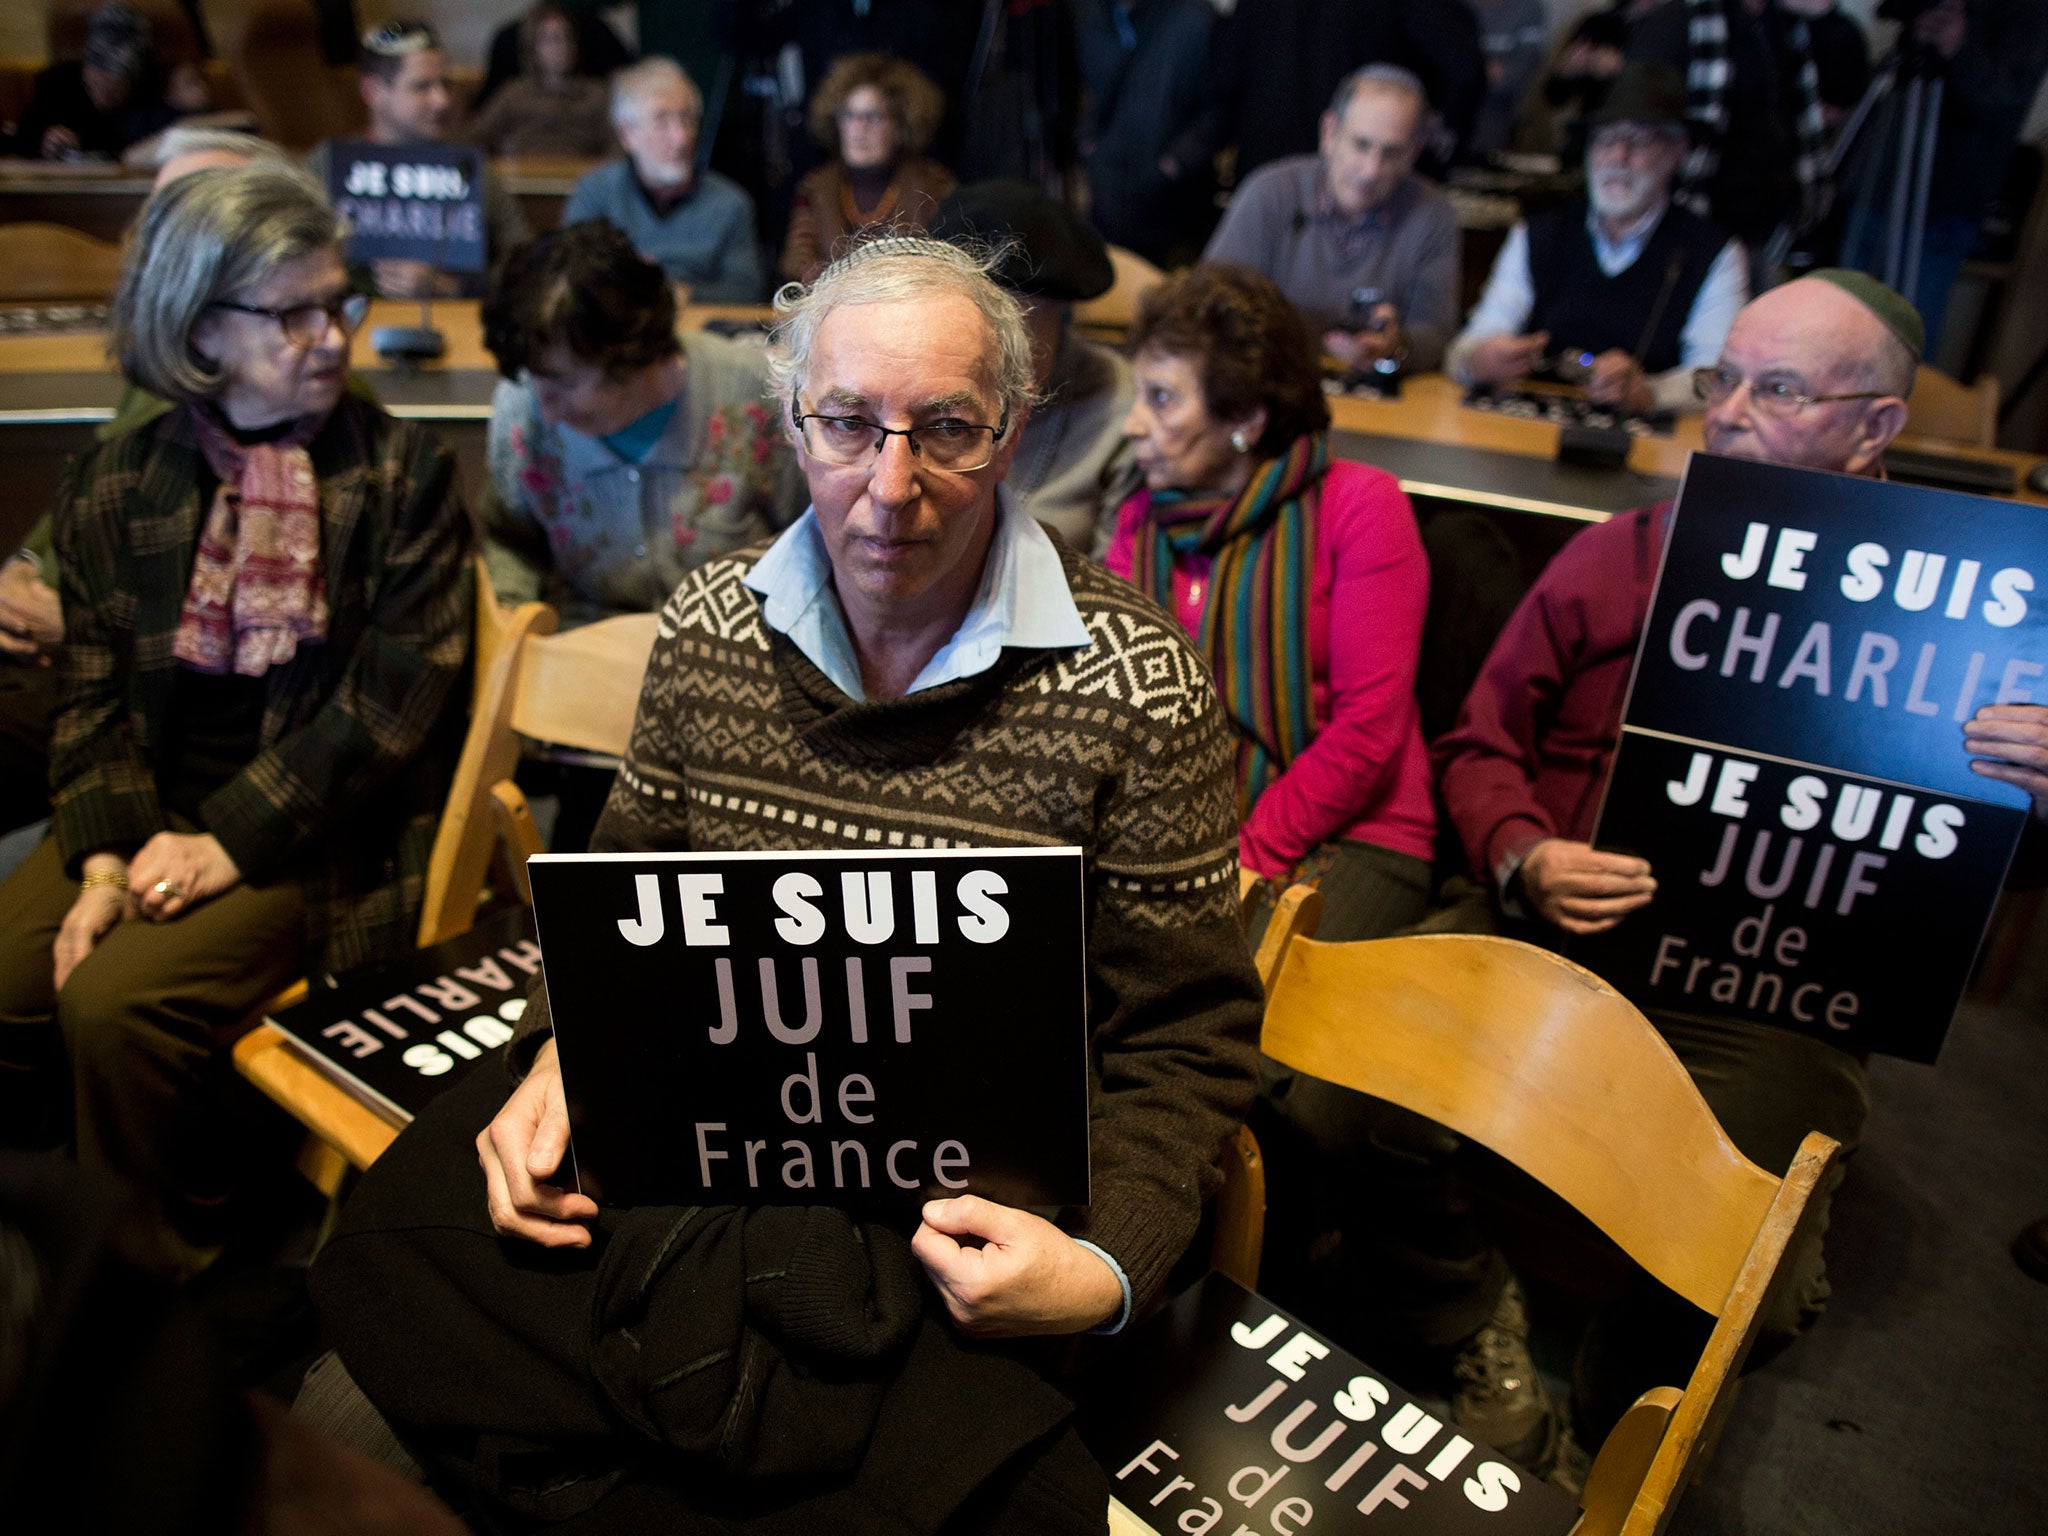 The Paris victims are remembered in Jerusalem